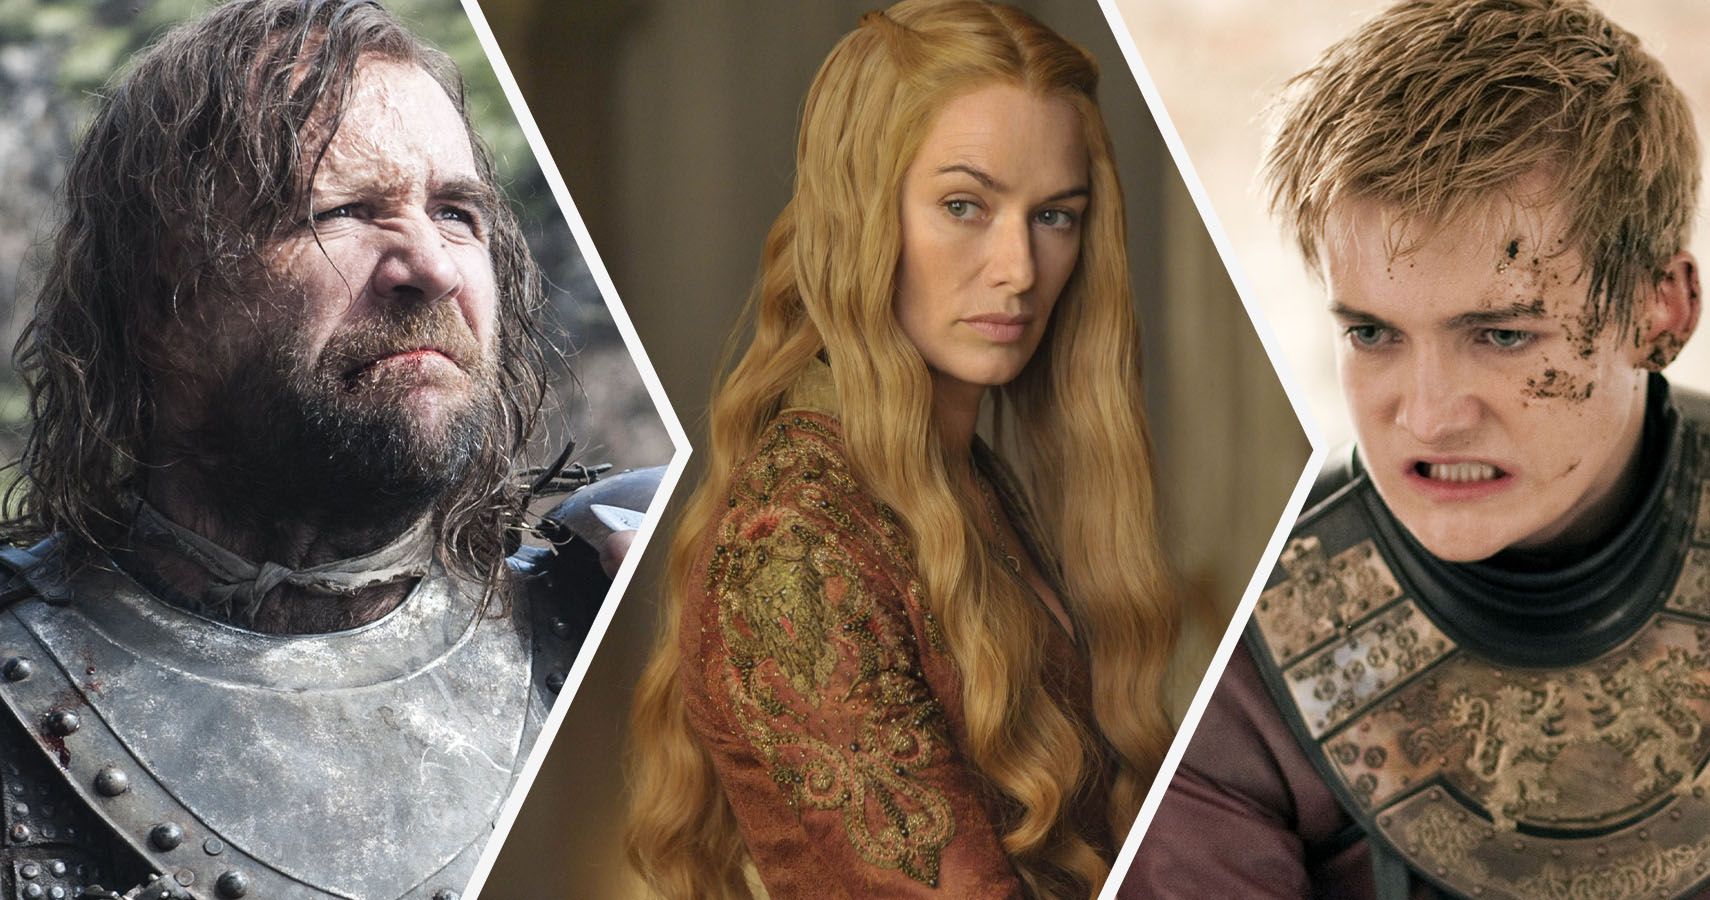 Game of Thrones villains The Hound, Cersei, and Joffrey